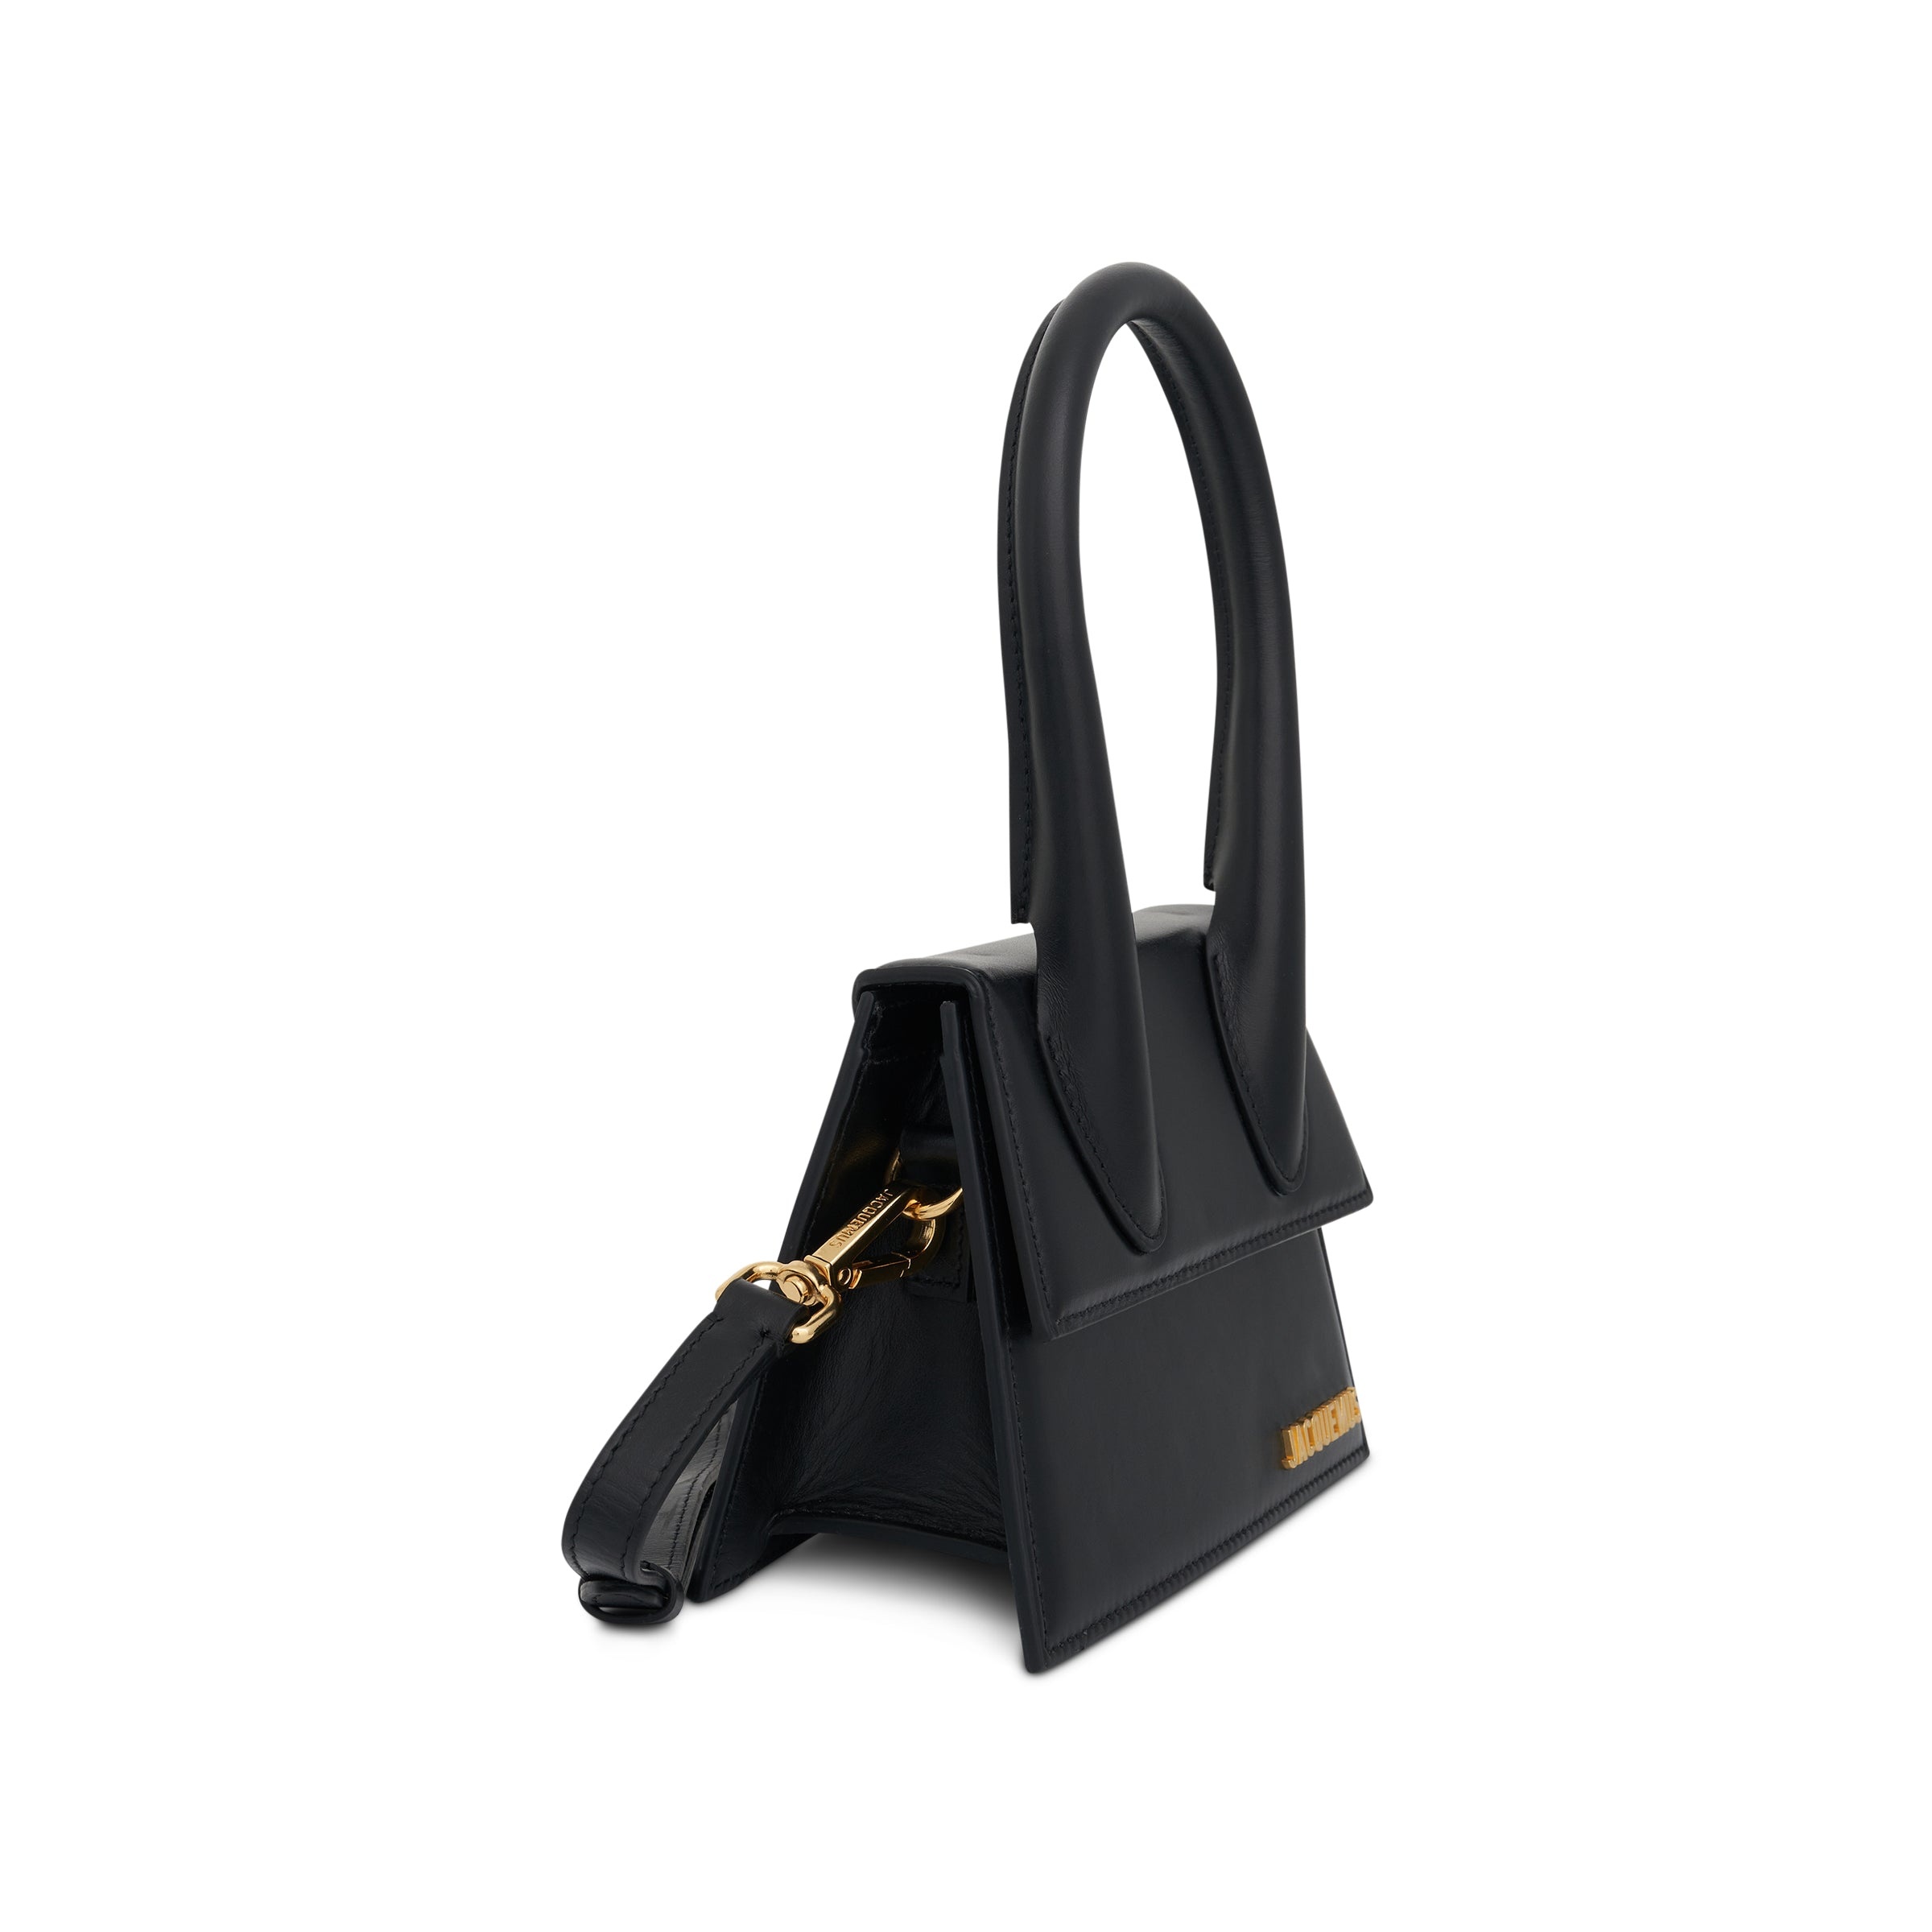 Le Chiquito Moyen Leather Bag in Black - 2